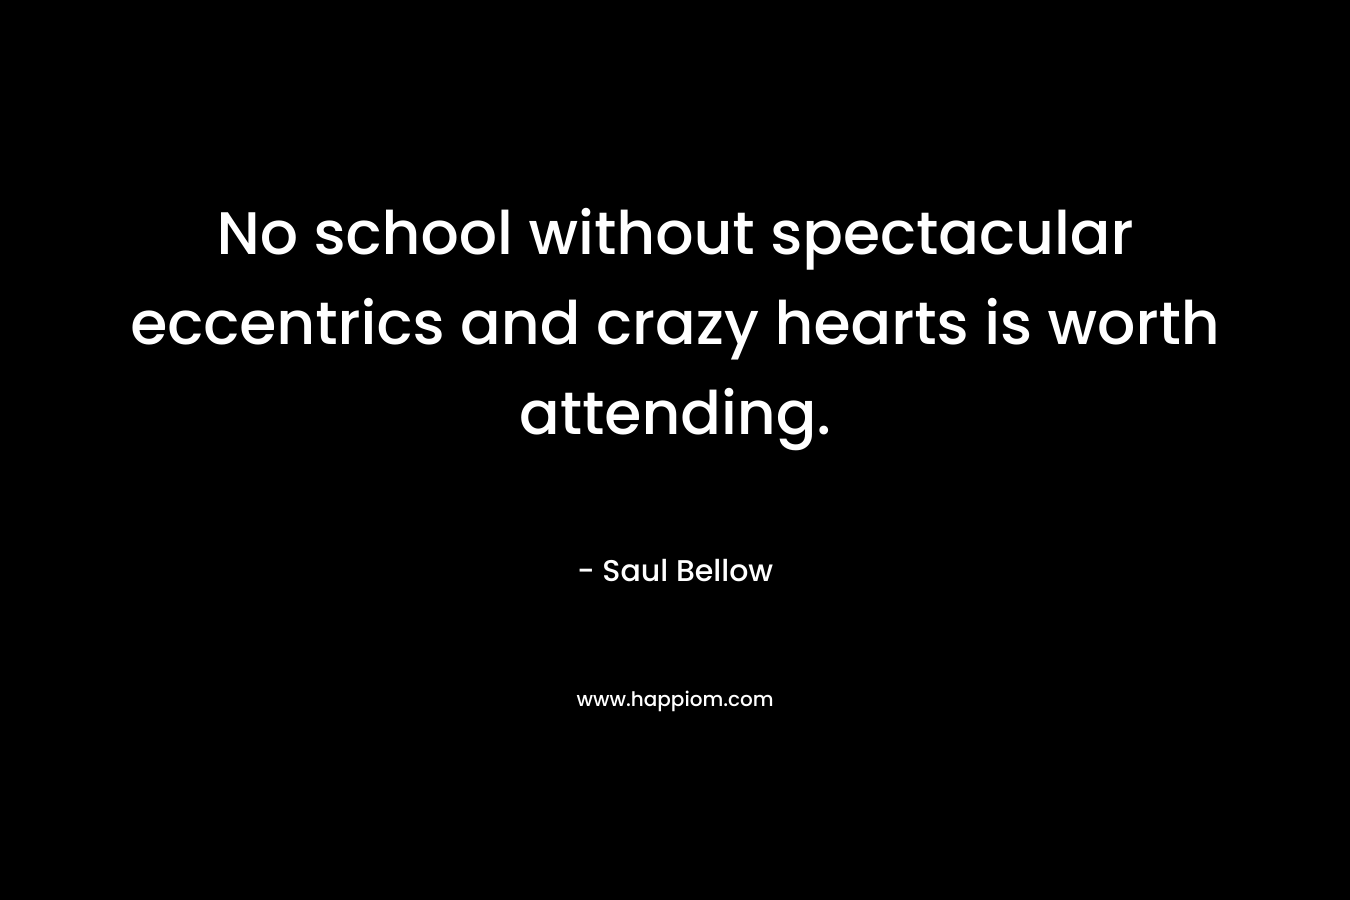 No school without spectacular eccentrics and crazy hearts is worth attending.